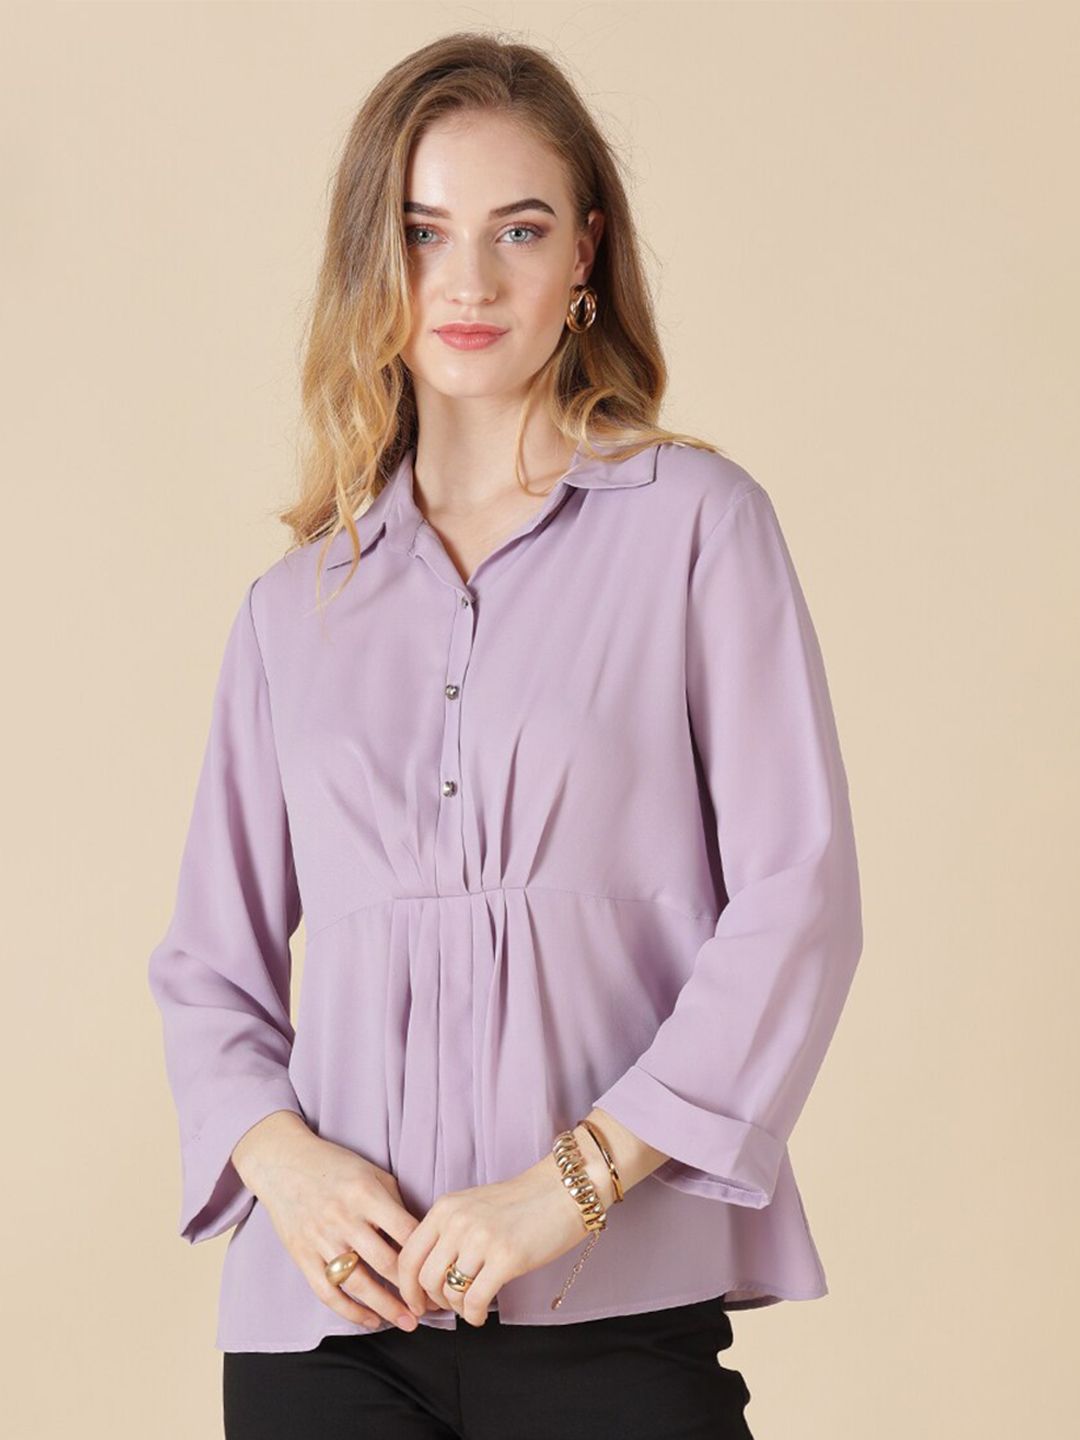 Gipsy Women Purple Shirt Style Top Price in India